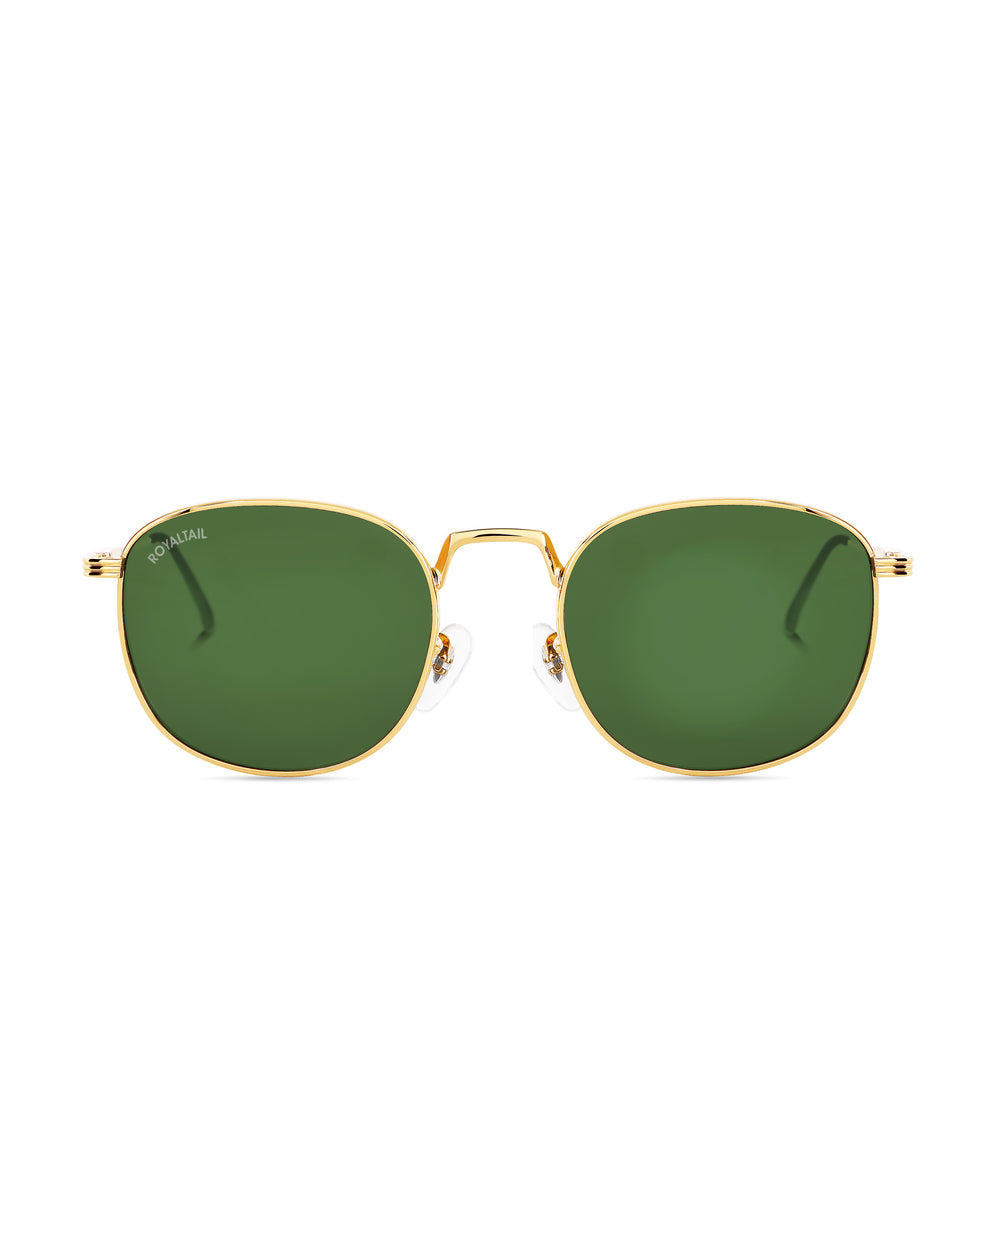 Green Glass and Gold Frame Round Medford Series Polarized Sunglasses - Royaltail